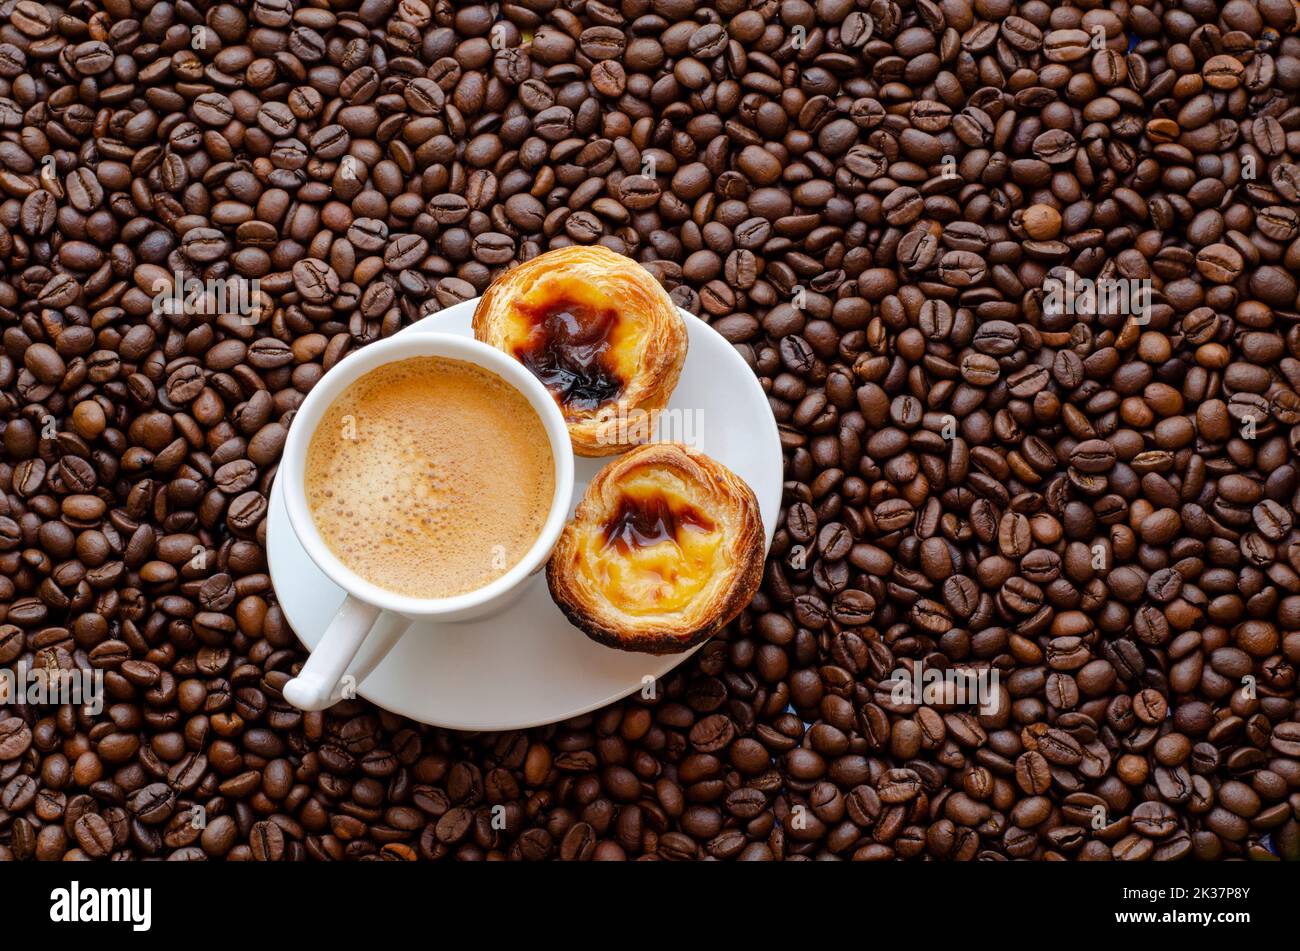 Coffee beans and a cup of hot espresso with foam, and two cakes. Stock Photo